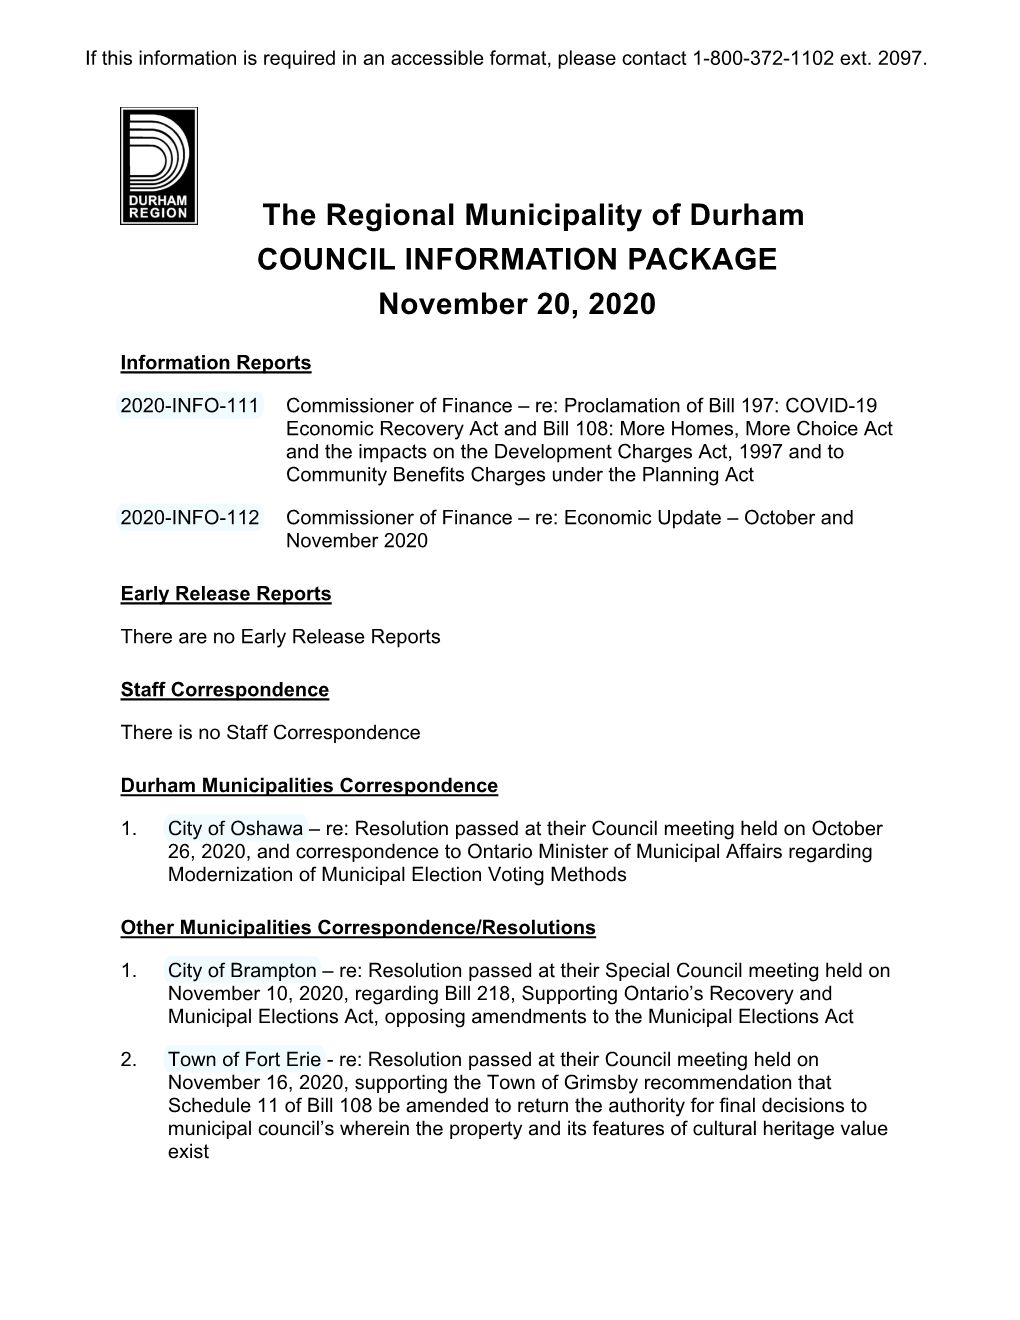 Council Information Package, November 20, 2020